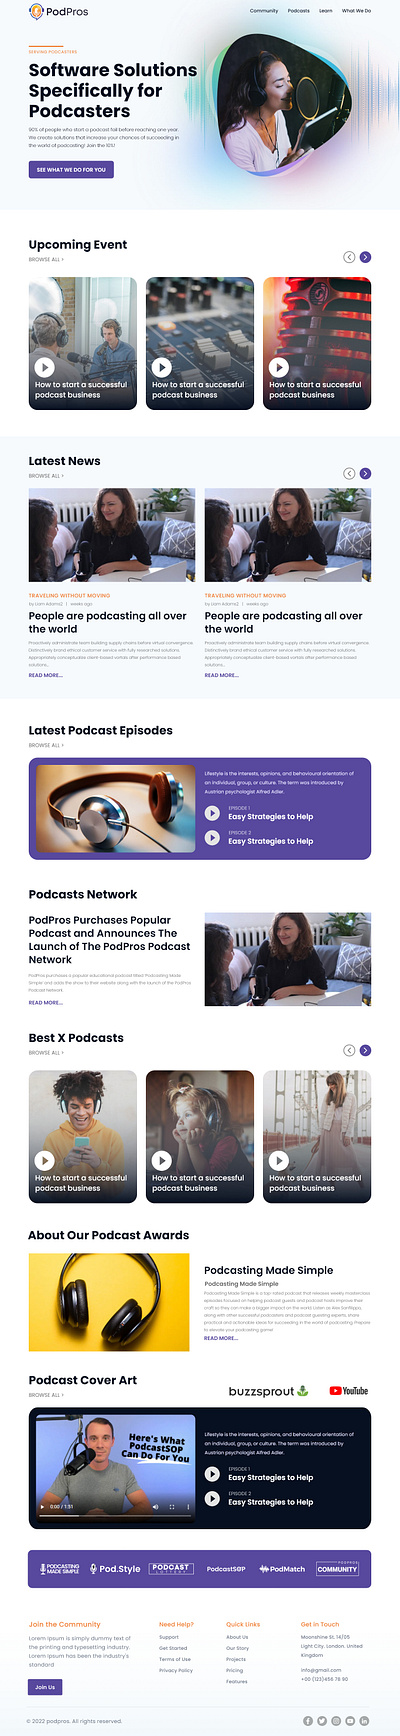 PODPROS Software Solutions Specifically for Podcasters Designs branding design graphic design landing page podcast website design ui ux websitedesign